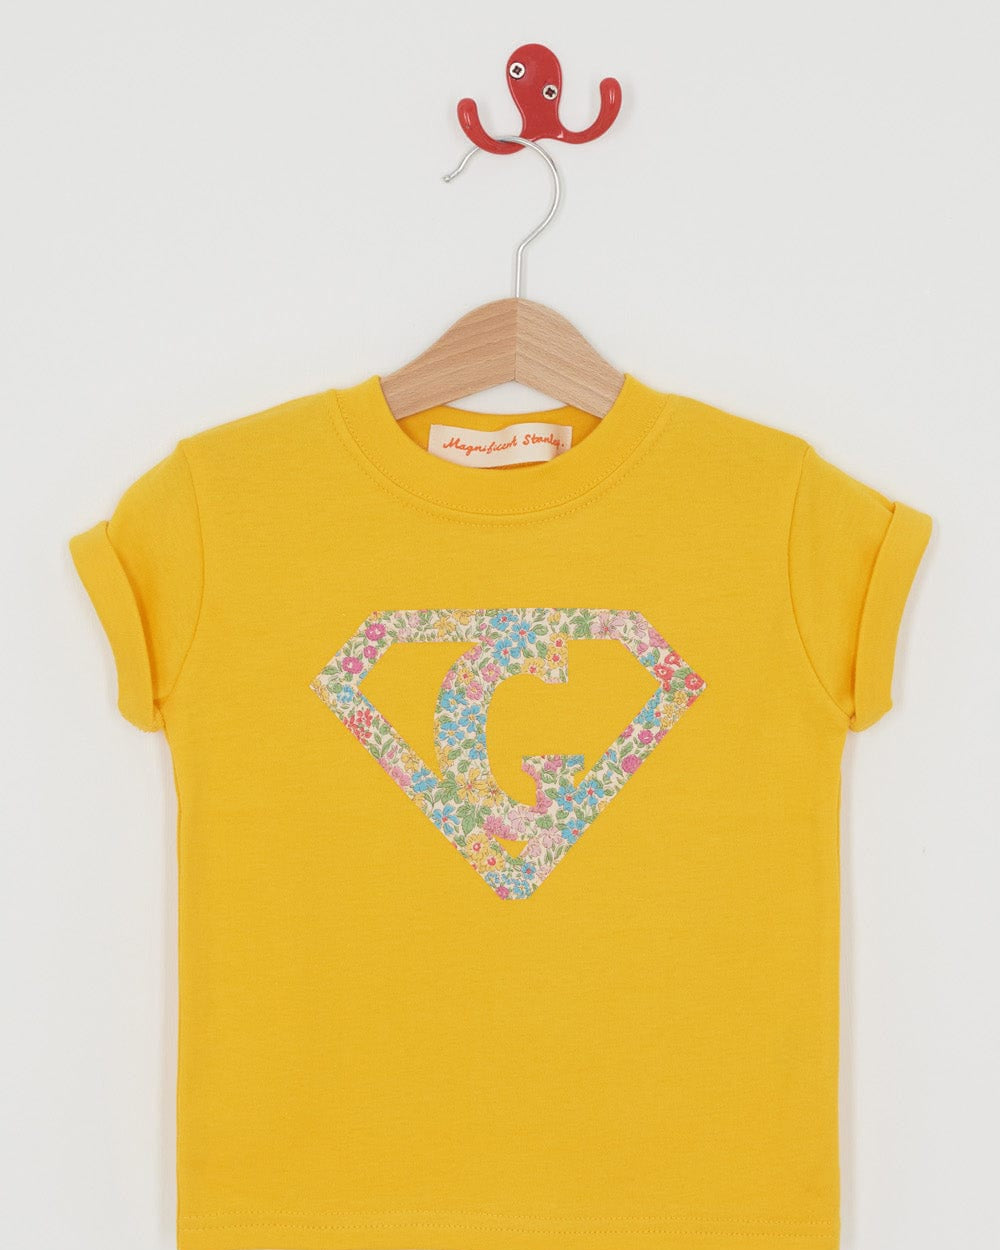 Magnificent Stanley Tee Superhero Yellow T-Shirt in choice of Liberty Print